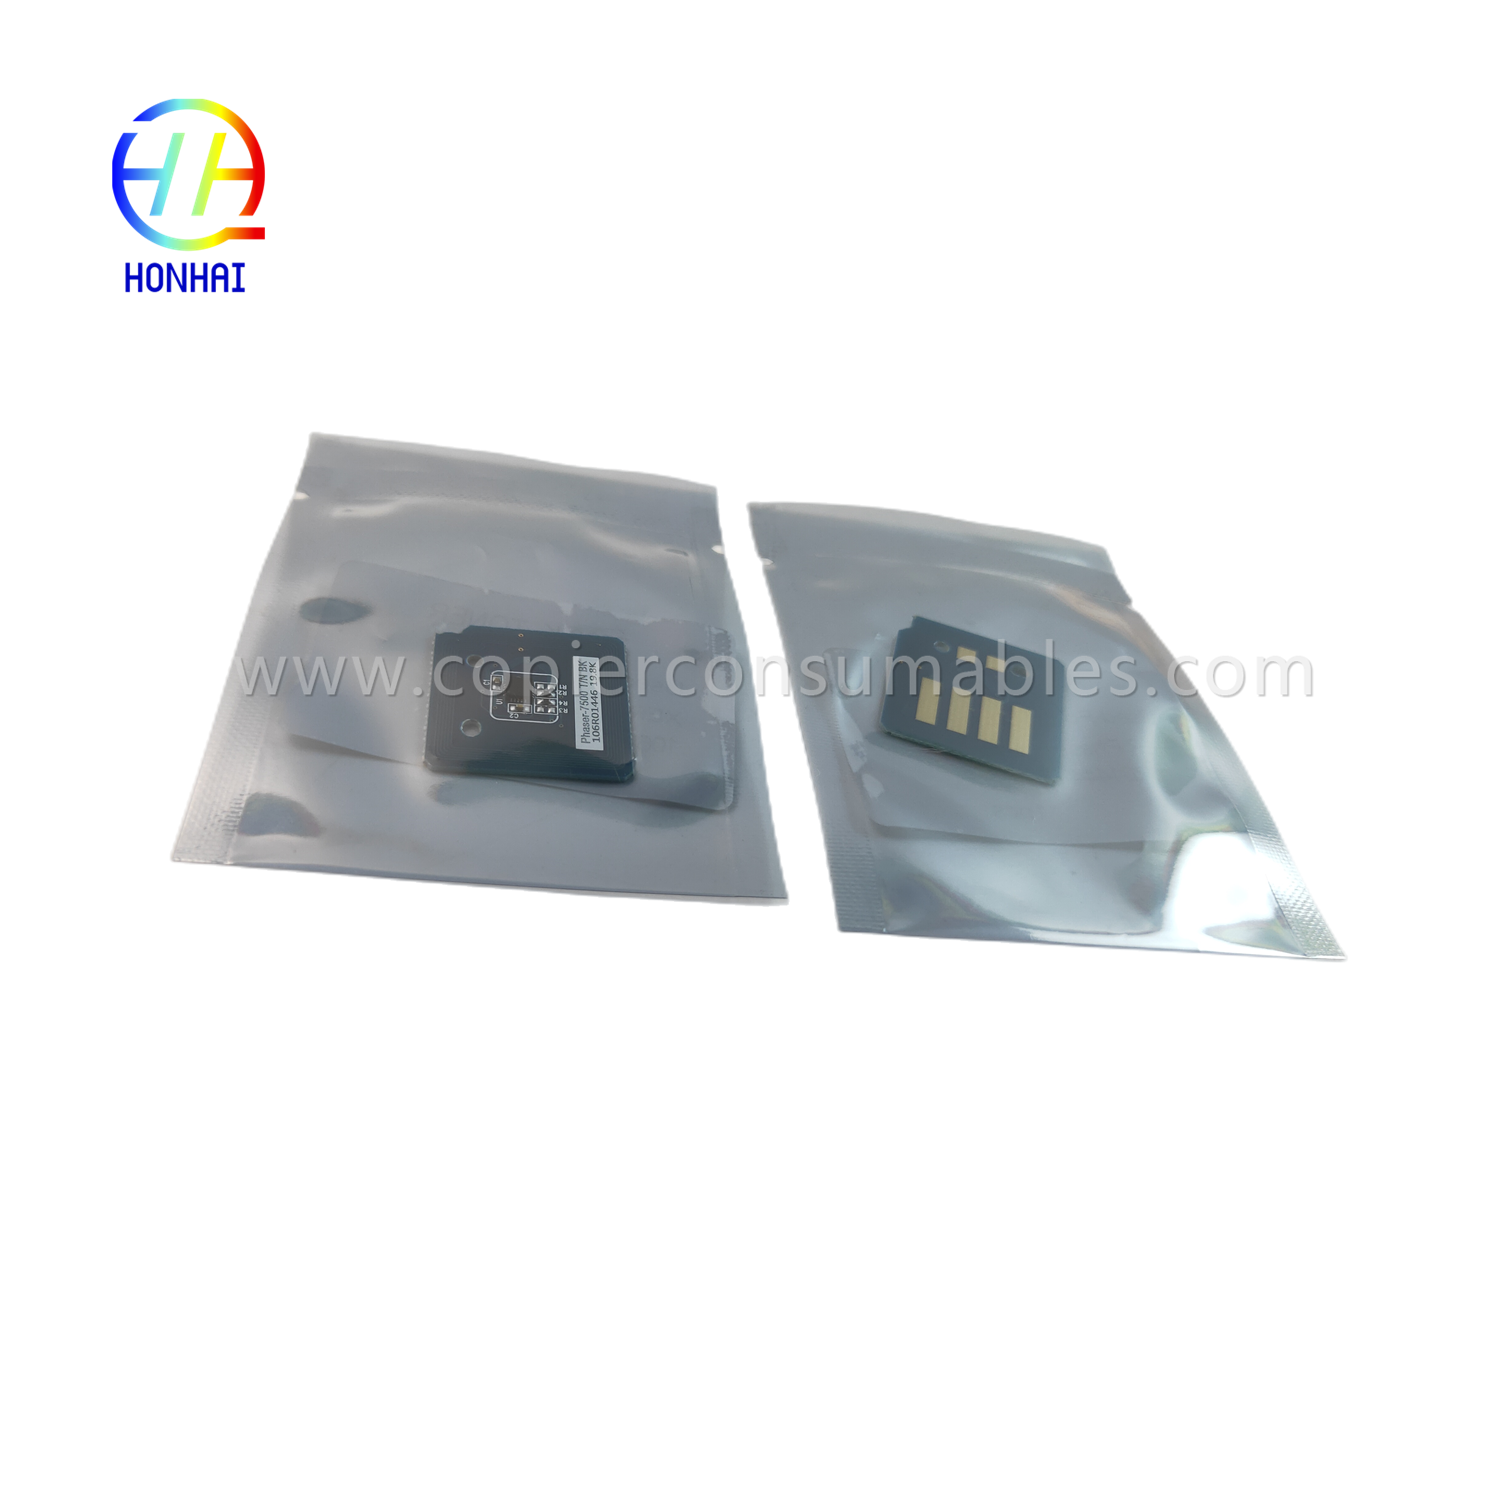 https://www.copierconsumables.com/toner-cartridge-chip-for-xerox-7500-7500n-7500dn-7500dt-106r01444-106r01446-toner-chip-product/